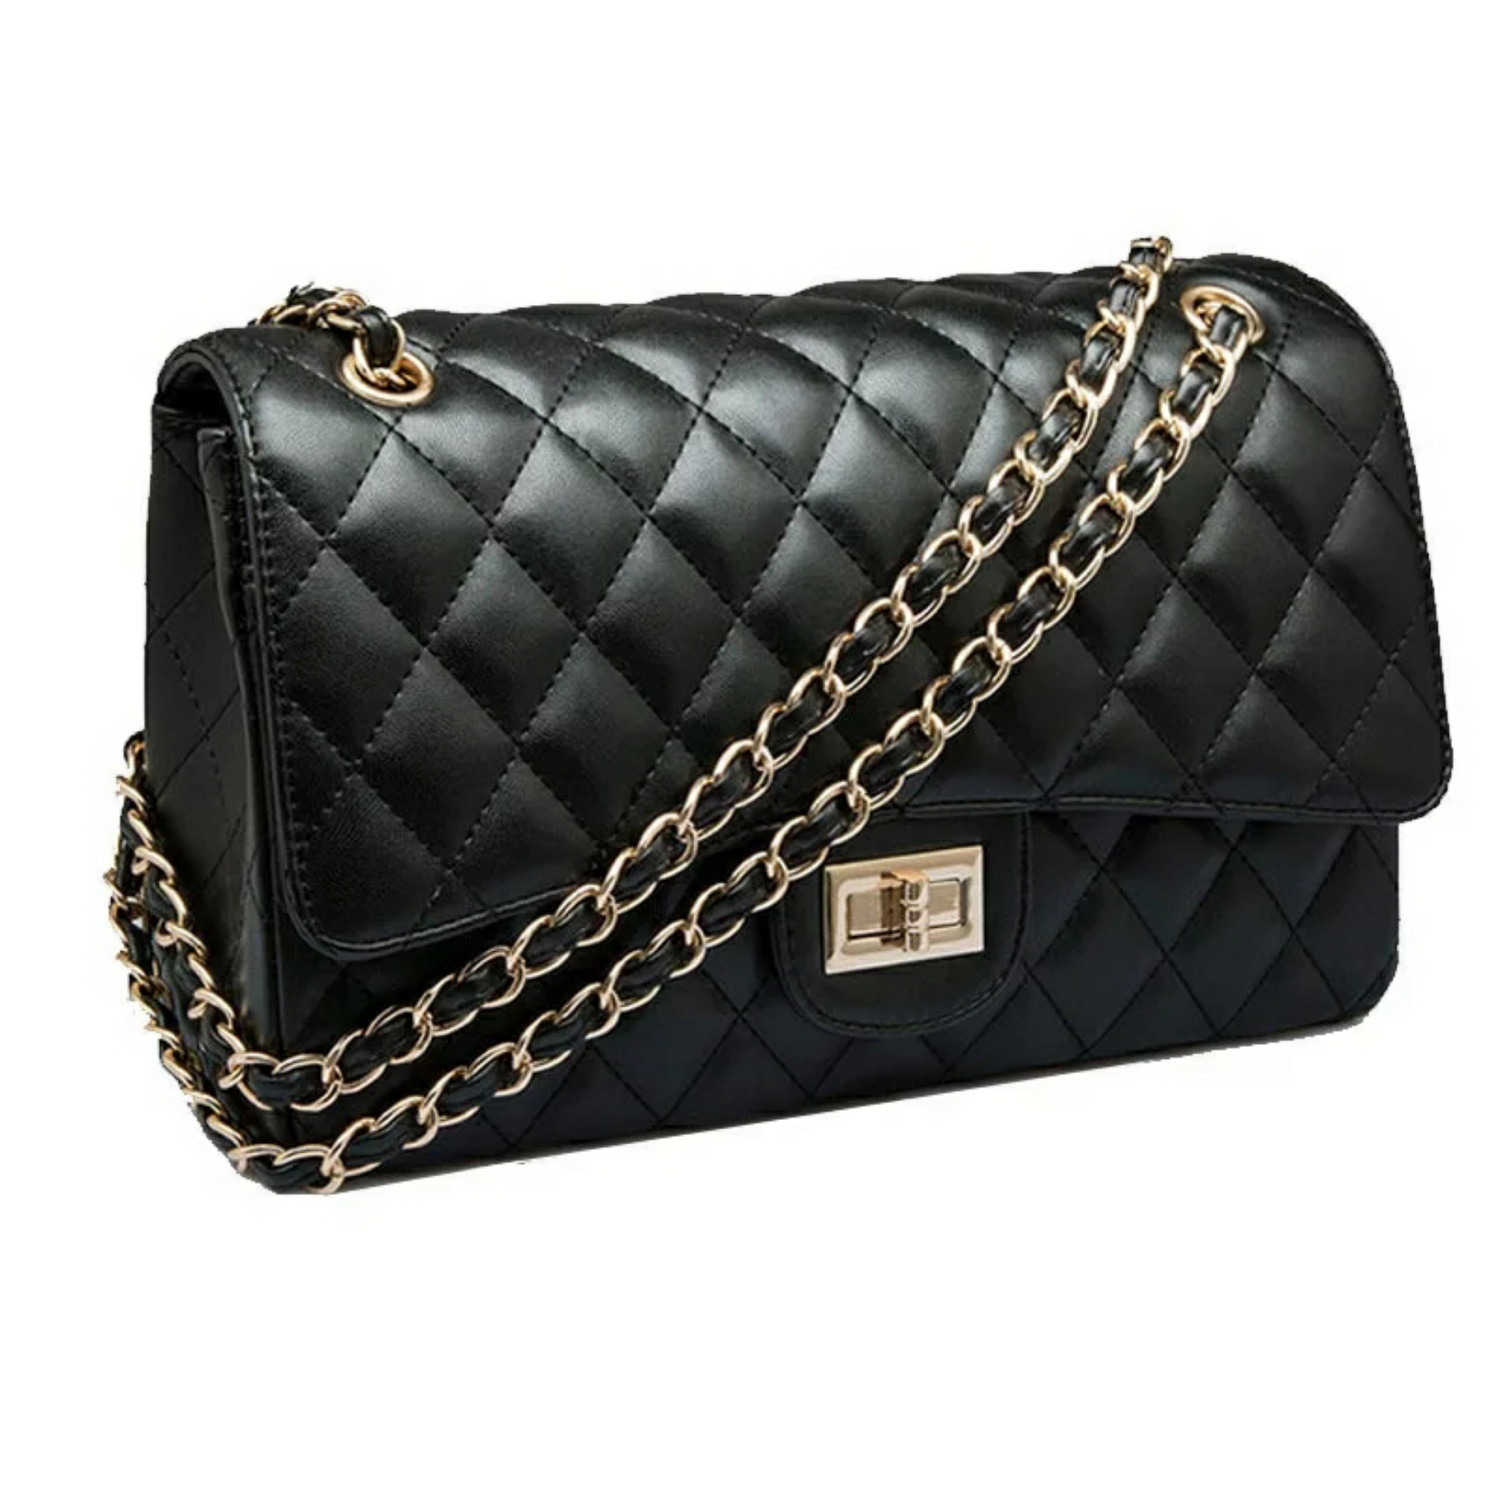 IHKWIP Quilted Flap Convertible Shoulder Bag w/ Chain Strap - QVC.com